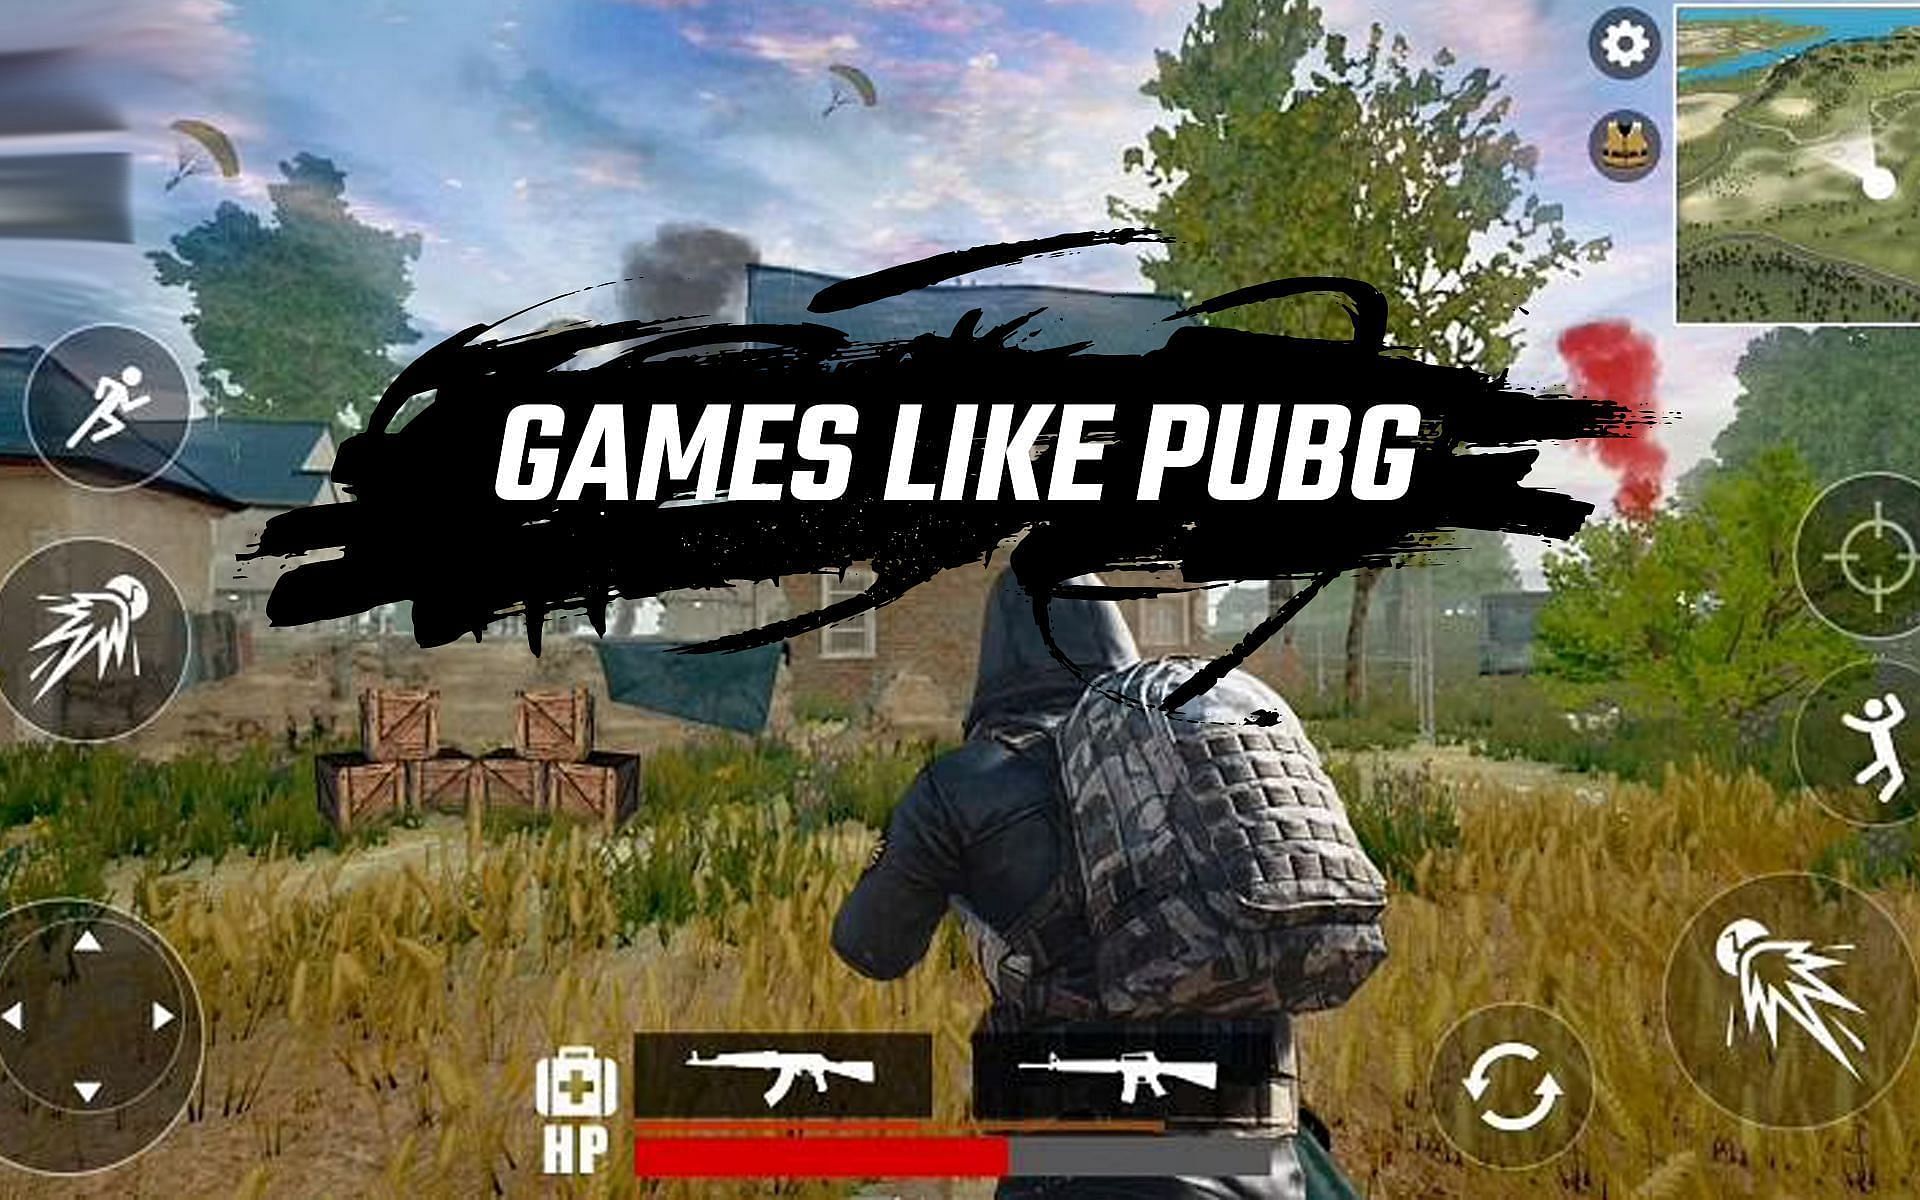 The best BR shooters like PUBG Mobile that are compatible with 4 GB RAM devices (Image via Sportskeeda)